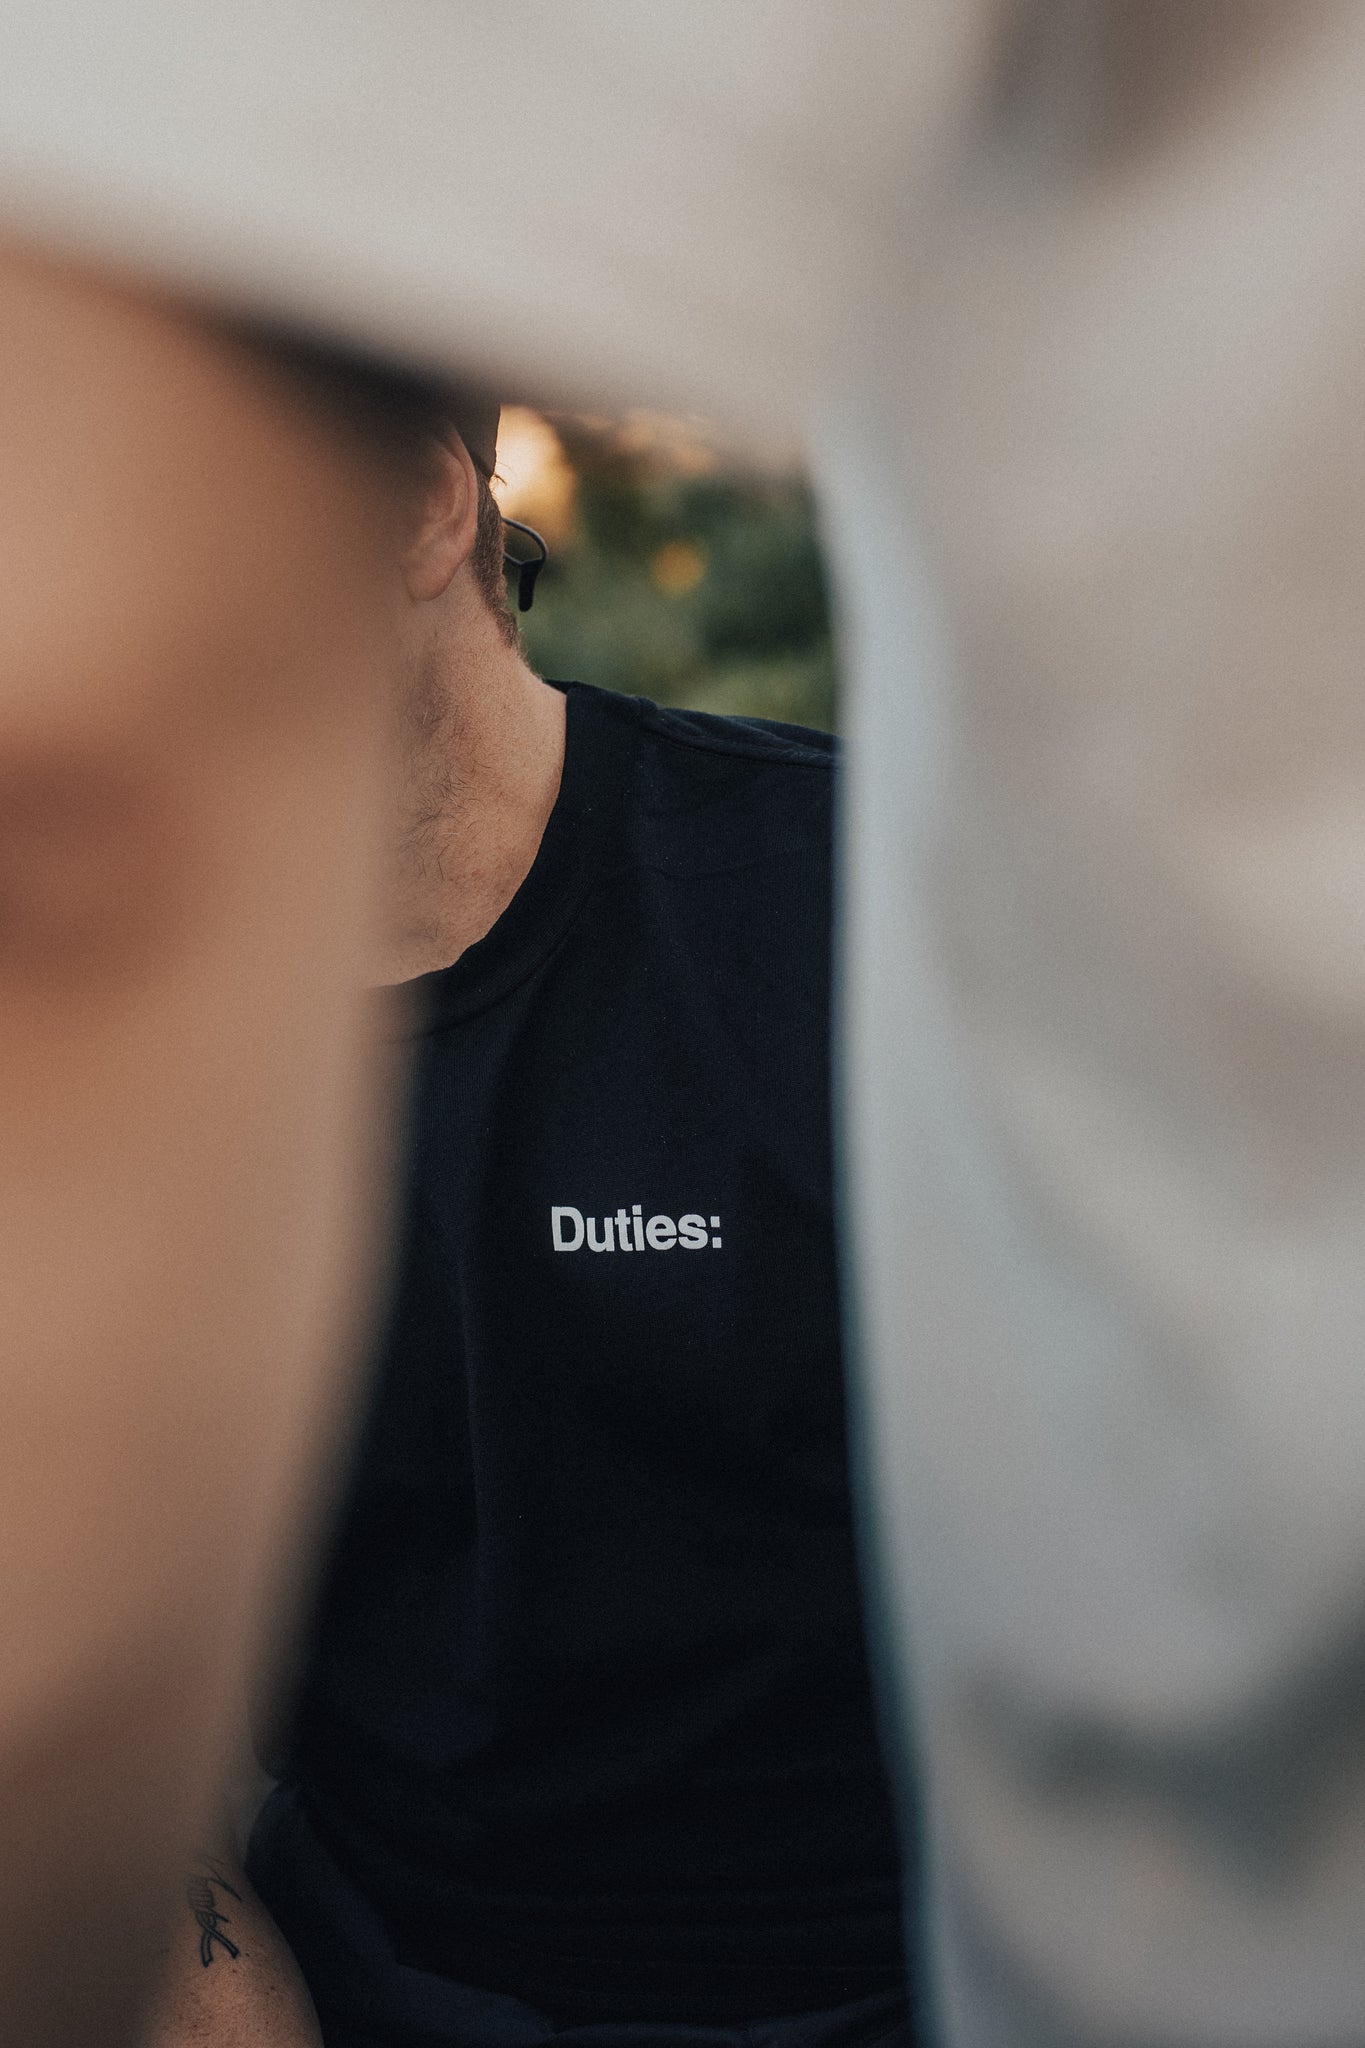 Detail photo of the Duties logo on the left chest of a black T-shirt.